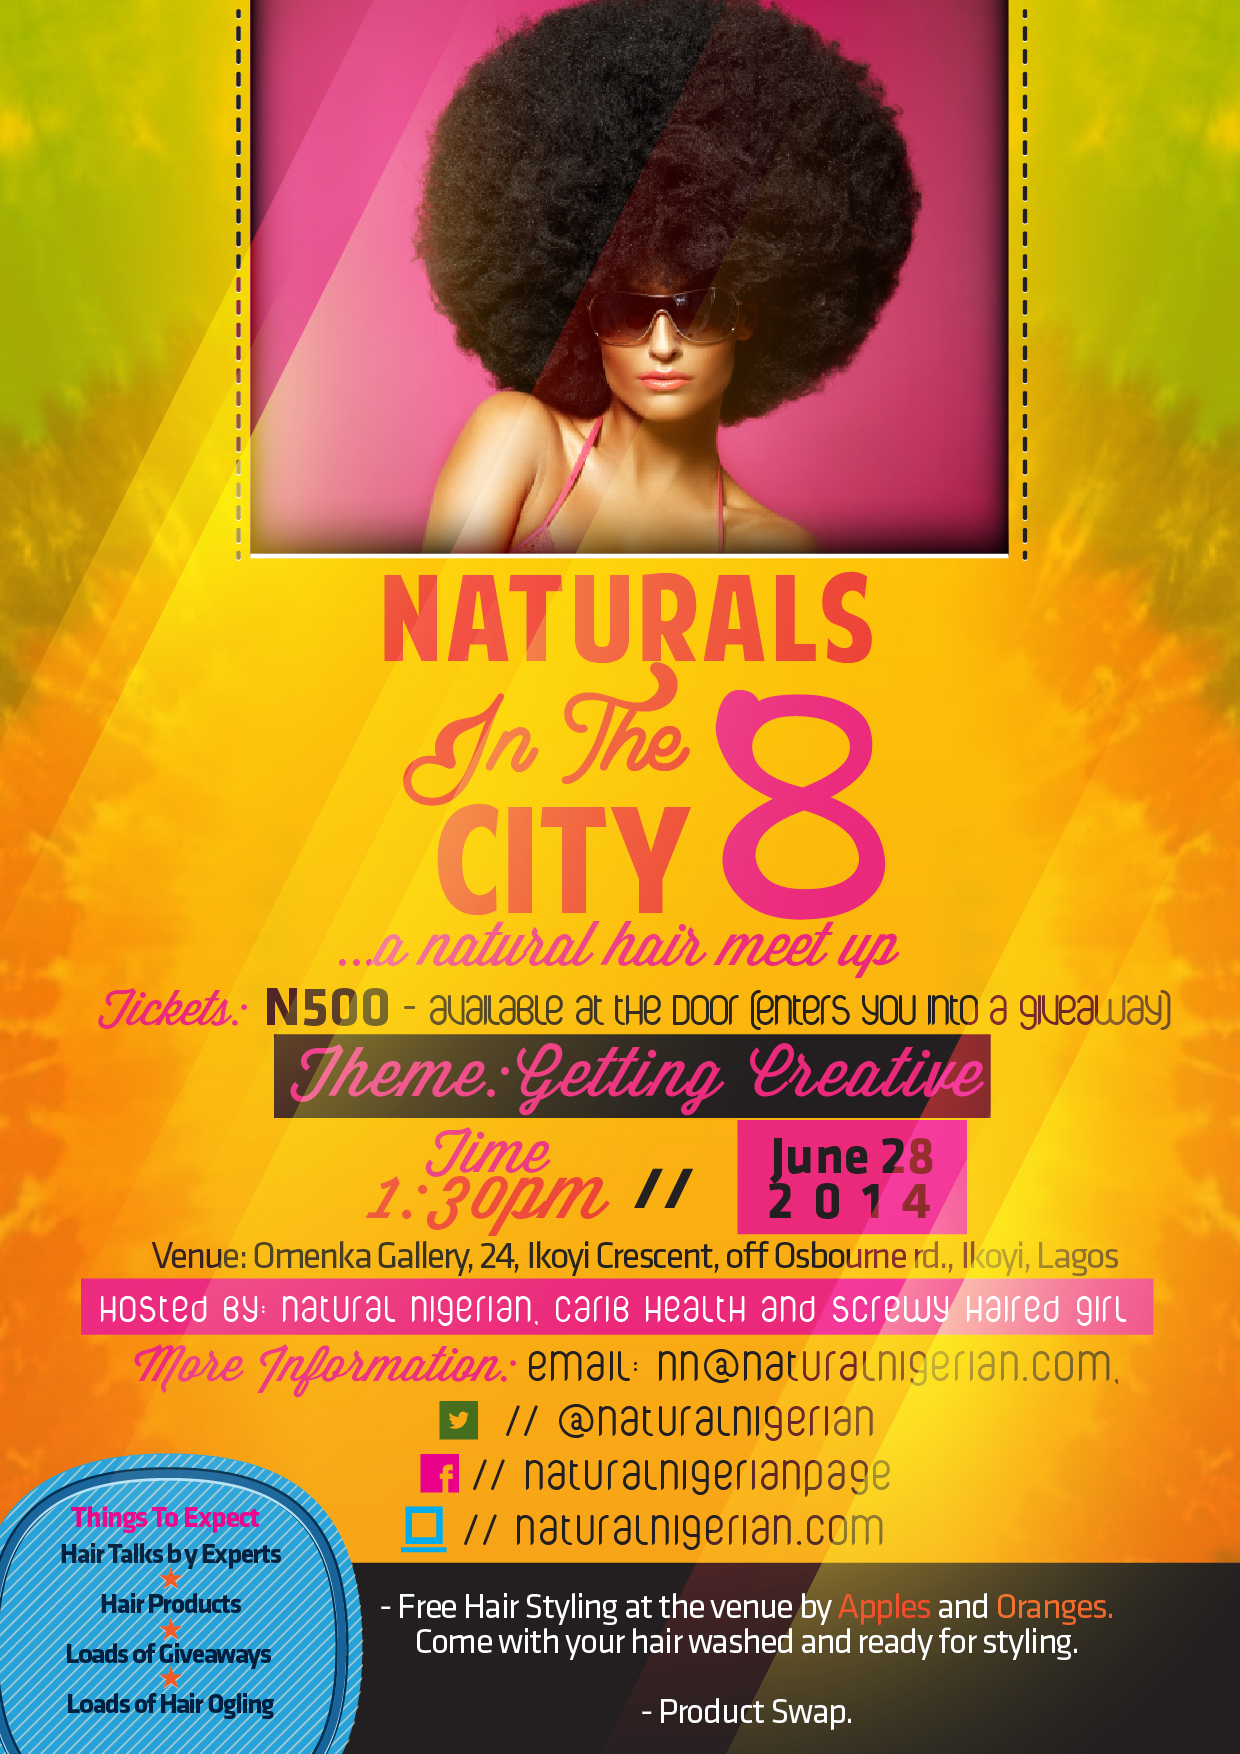 Naturals in the City 8 Lagos Nigeria Hair Meet Up